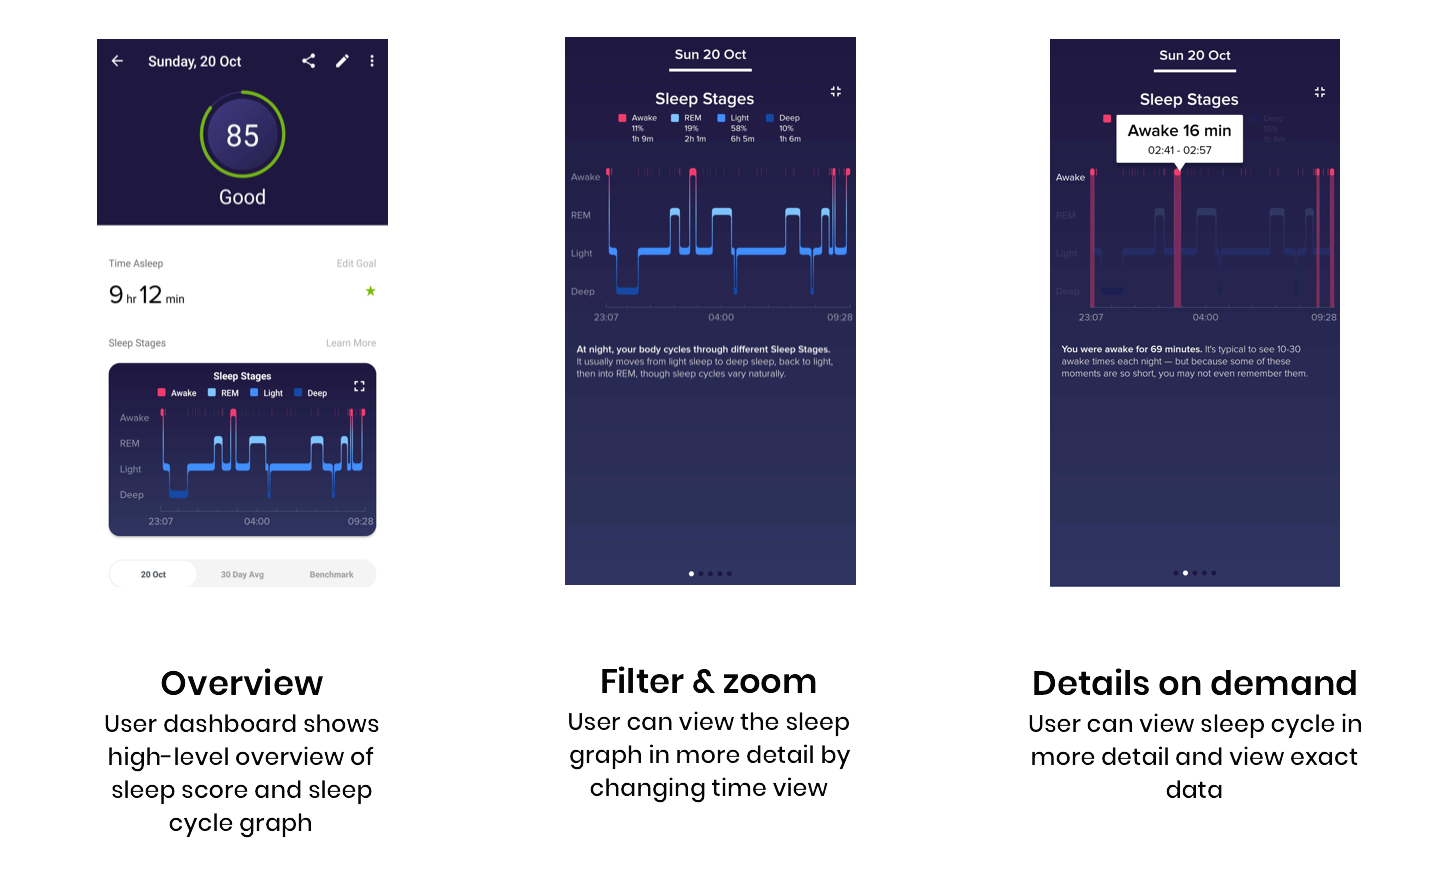 An image of an application on a mobile device showing sleep phases. 